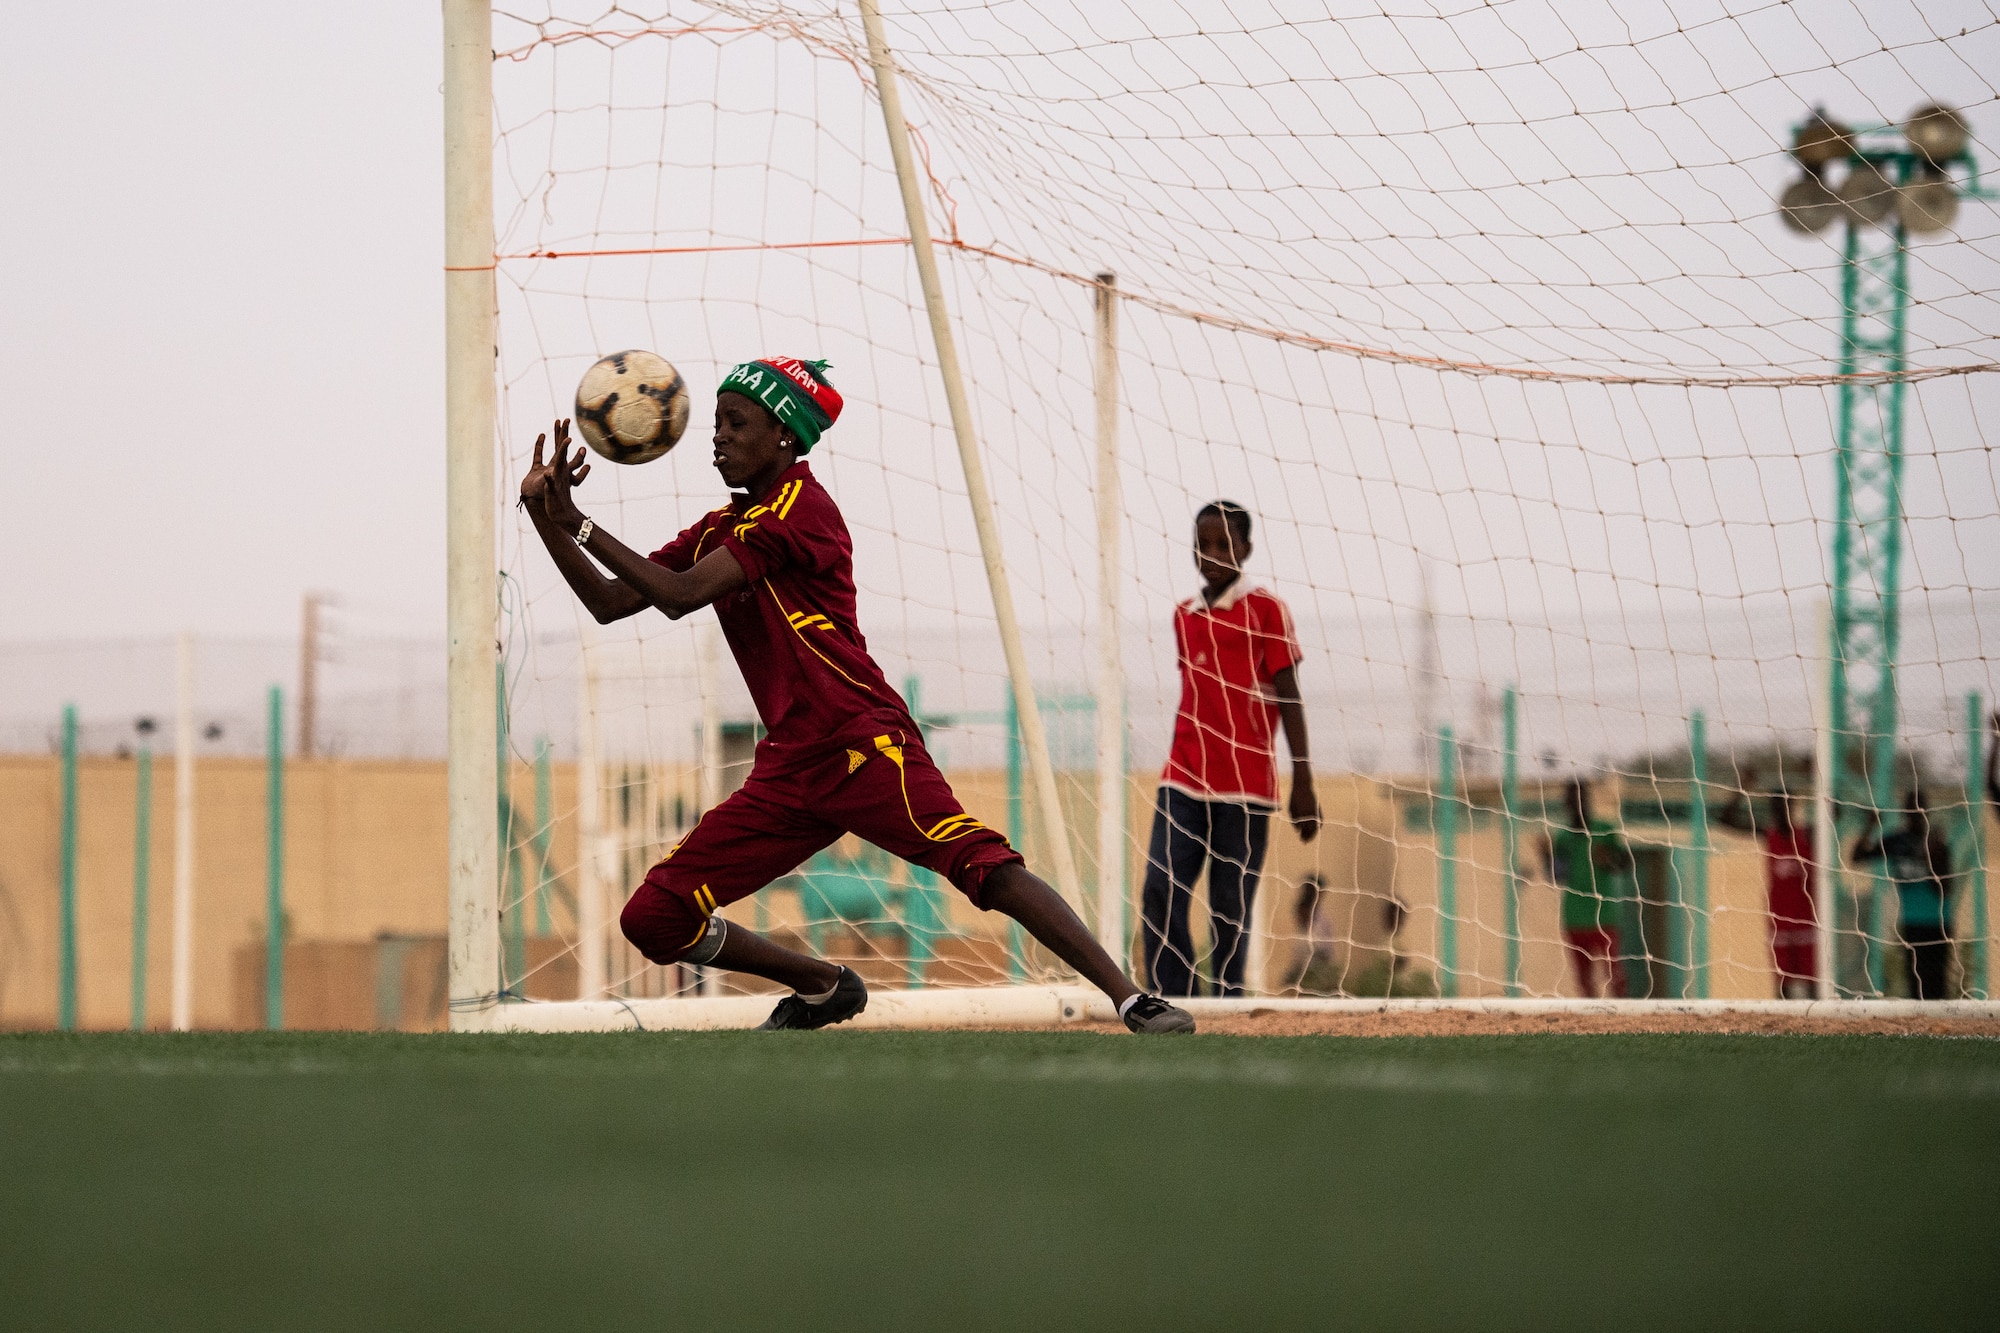 The goalie for the Nassara Athletic Club Women’s Soccer Team attempts to block a goal during a recreational game between Nigerien Air Base 201 and the Nassara Athletic Club Women’s Soccer Team at the Agadez Sports Stadium in Agadez, Niger, July 5, 2019. The civil affairs team held the game to build rapport and promote positive sentiment between the local community and AB 201 personnel. The game ended with a three on three shootout resulting in AB 201’s victory. (U.S. Air Force photo by Staff Sgt. Devin Boyer)